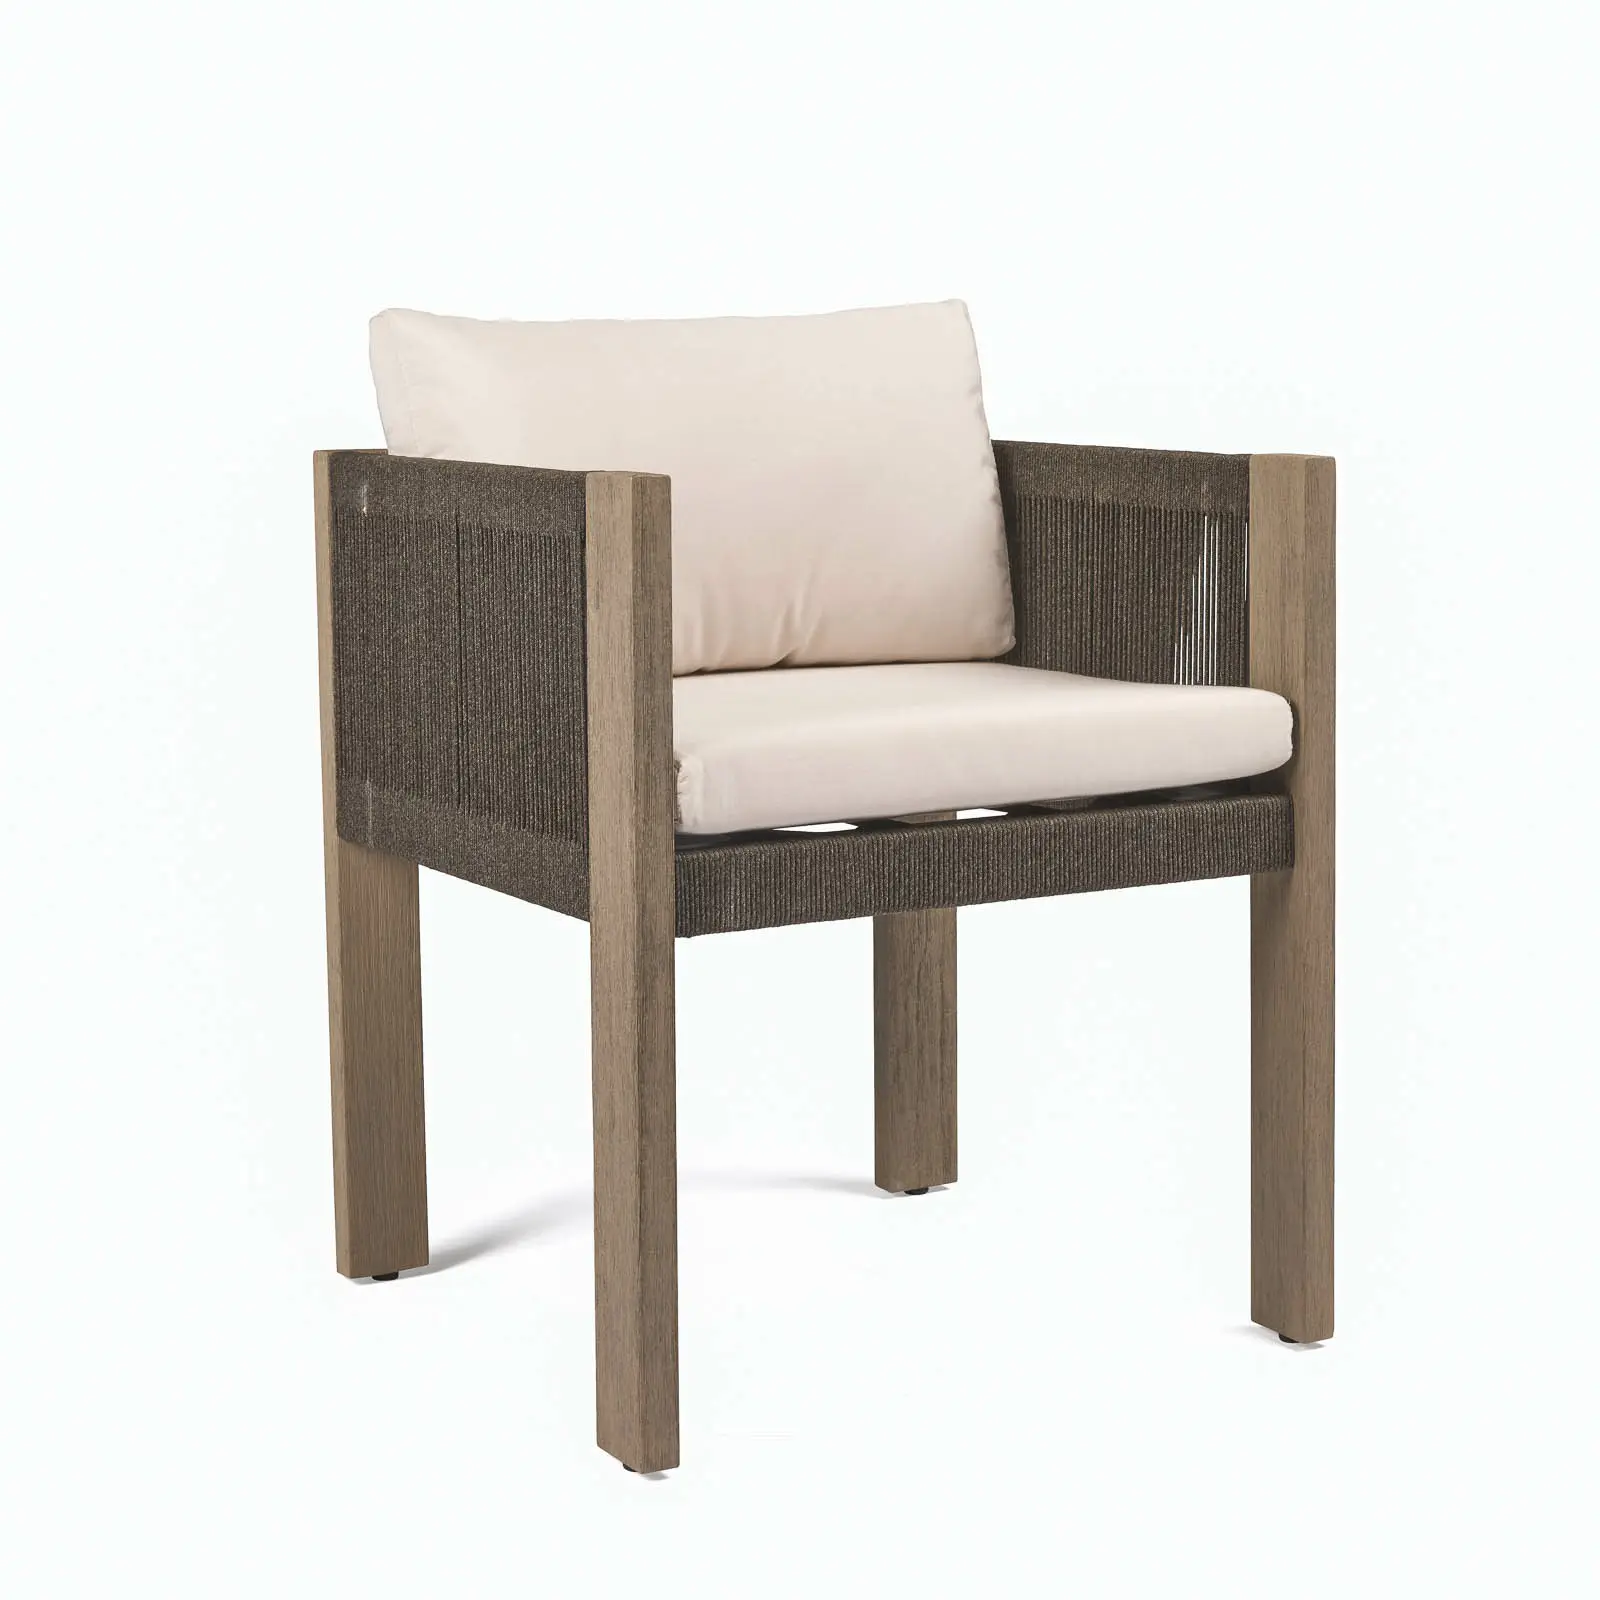 Minimalist Dining Chair Teak Wood Luxury Outdoor Furniture Woven Rope Chairs